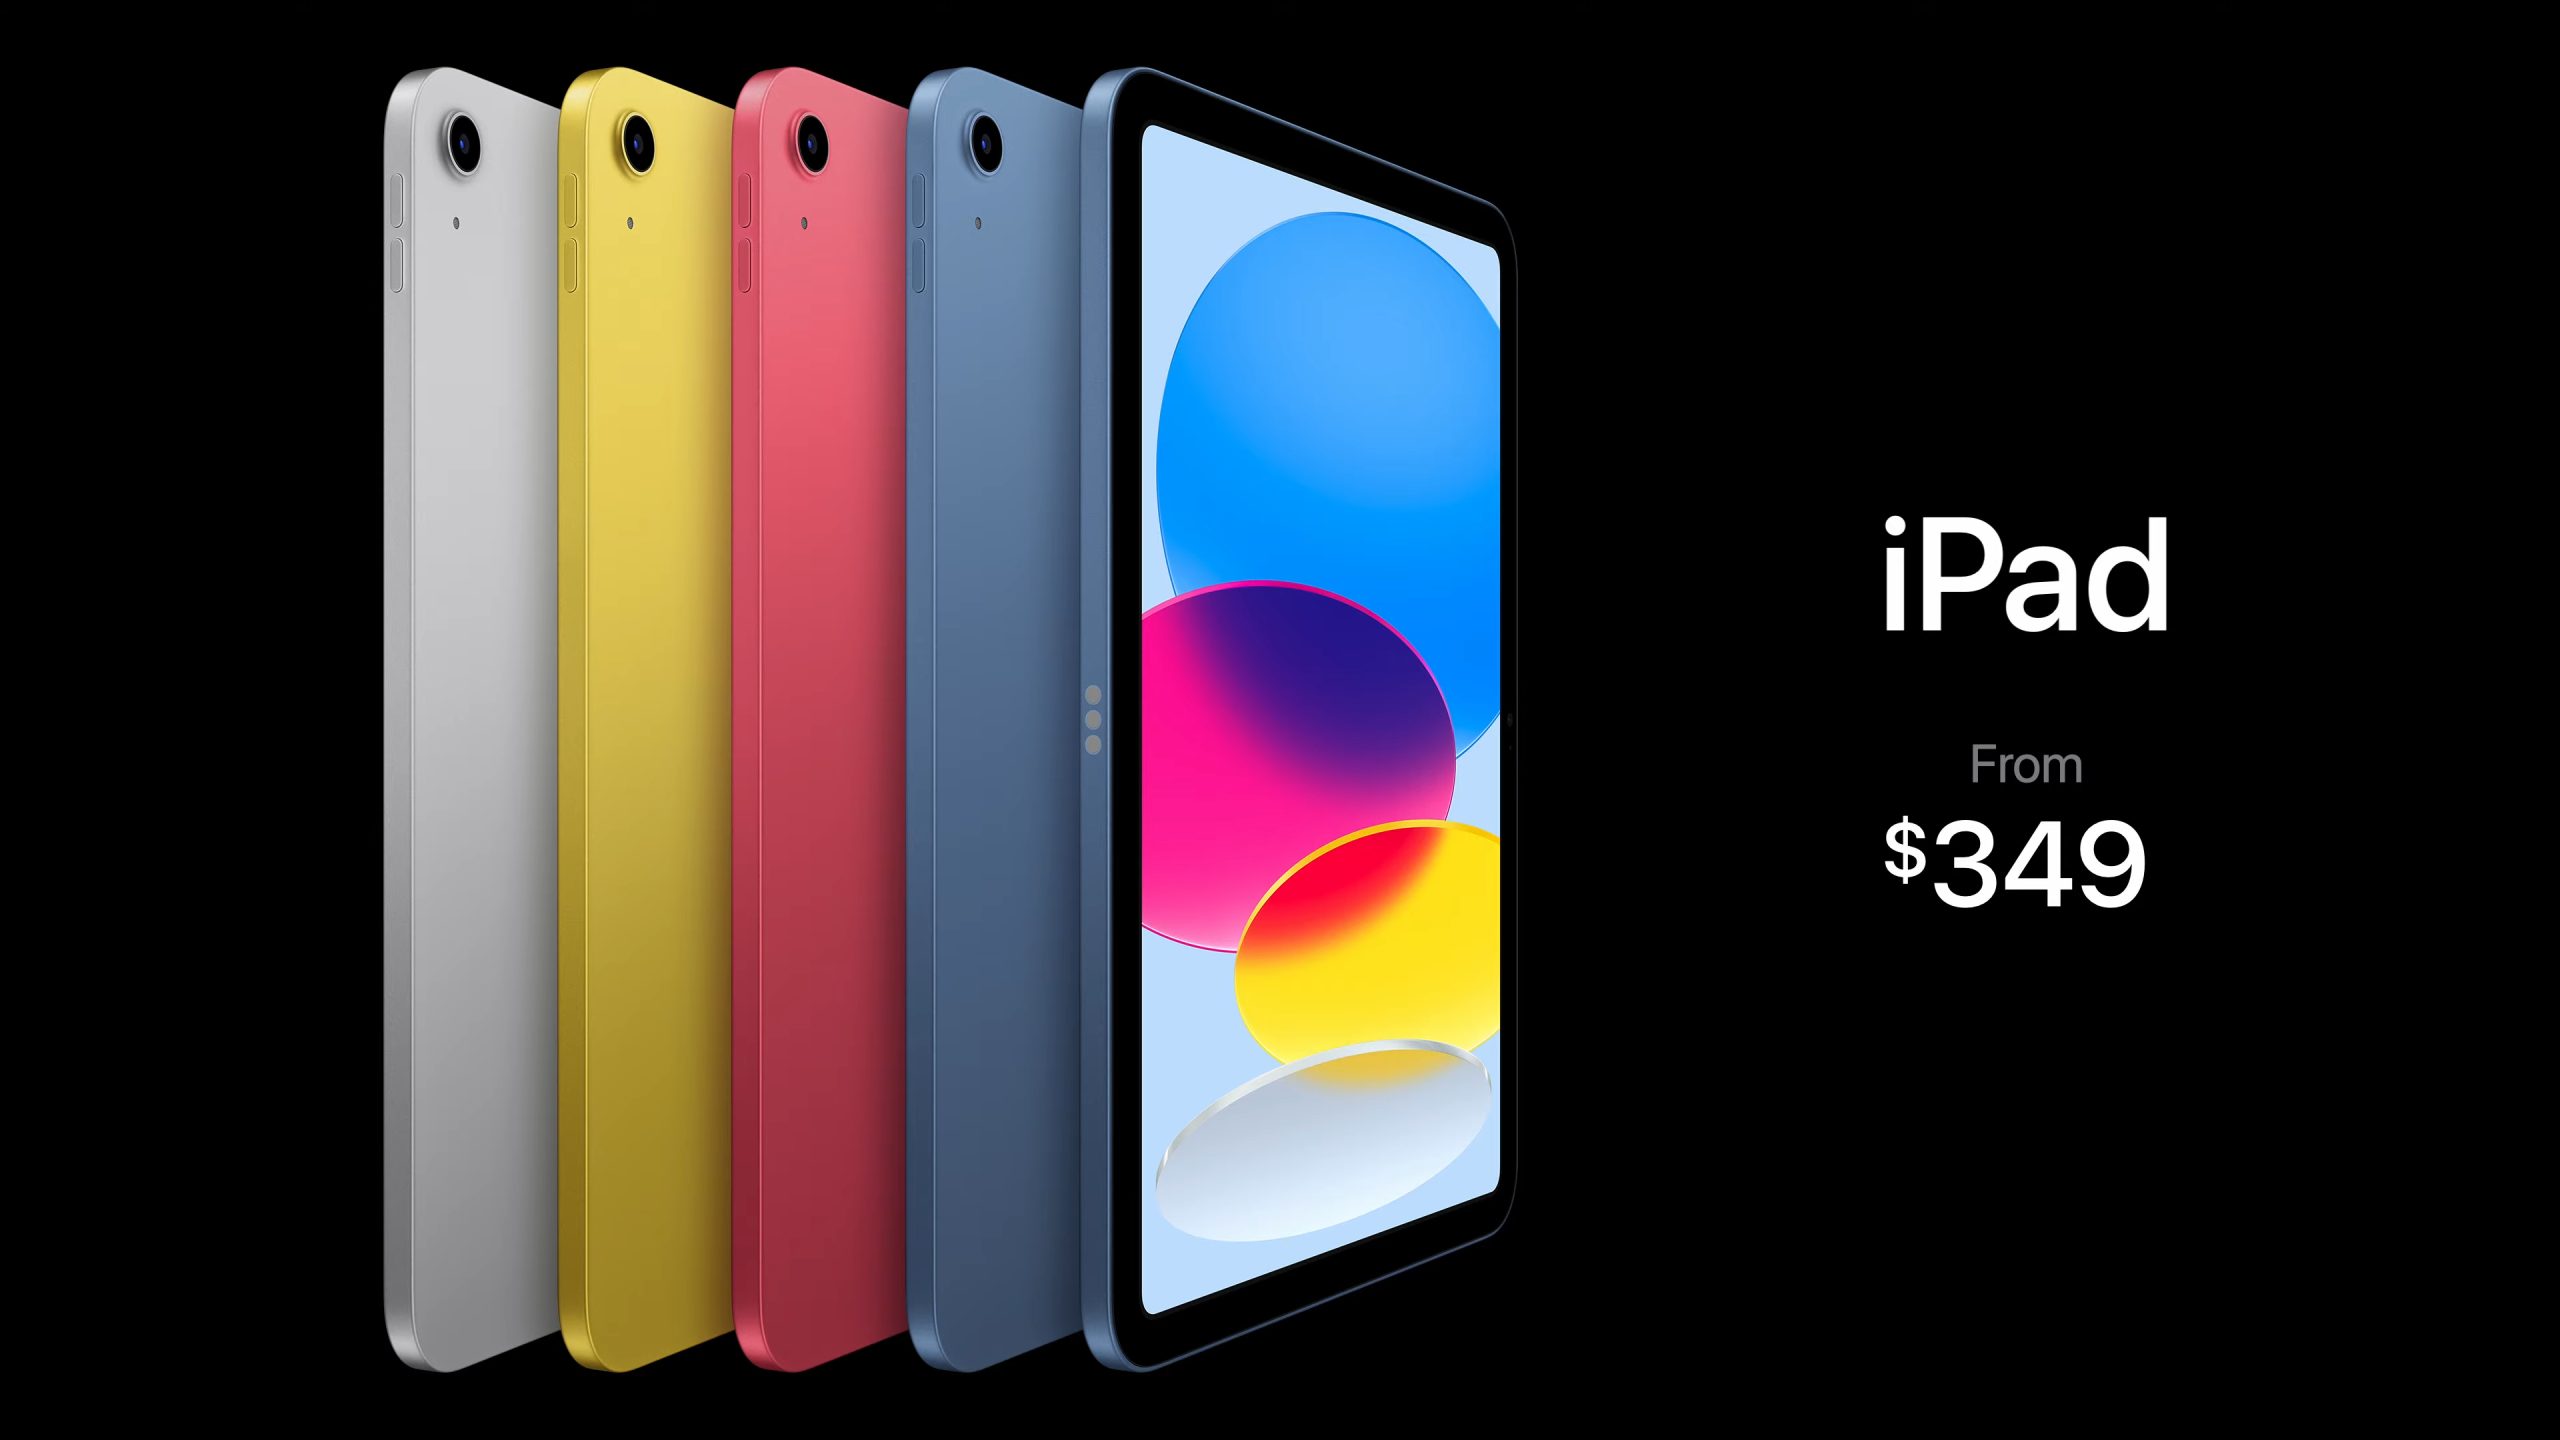 Apple Drops 10th Gen iPad Price to $349, Discontinues 9th Gen